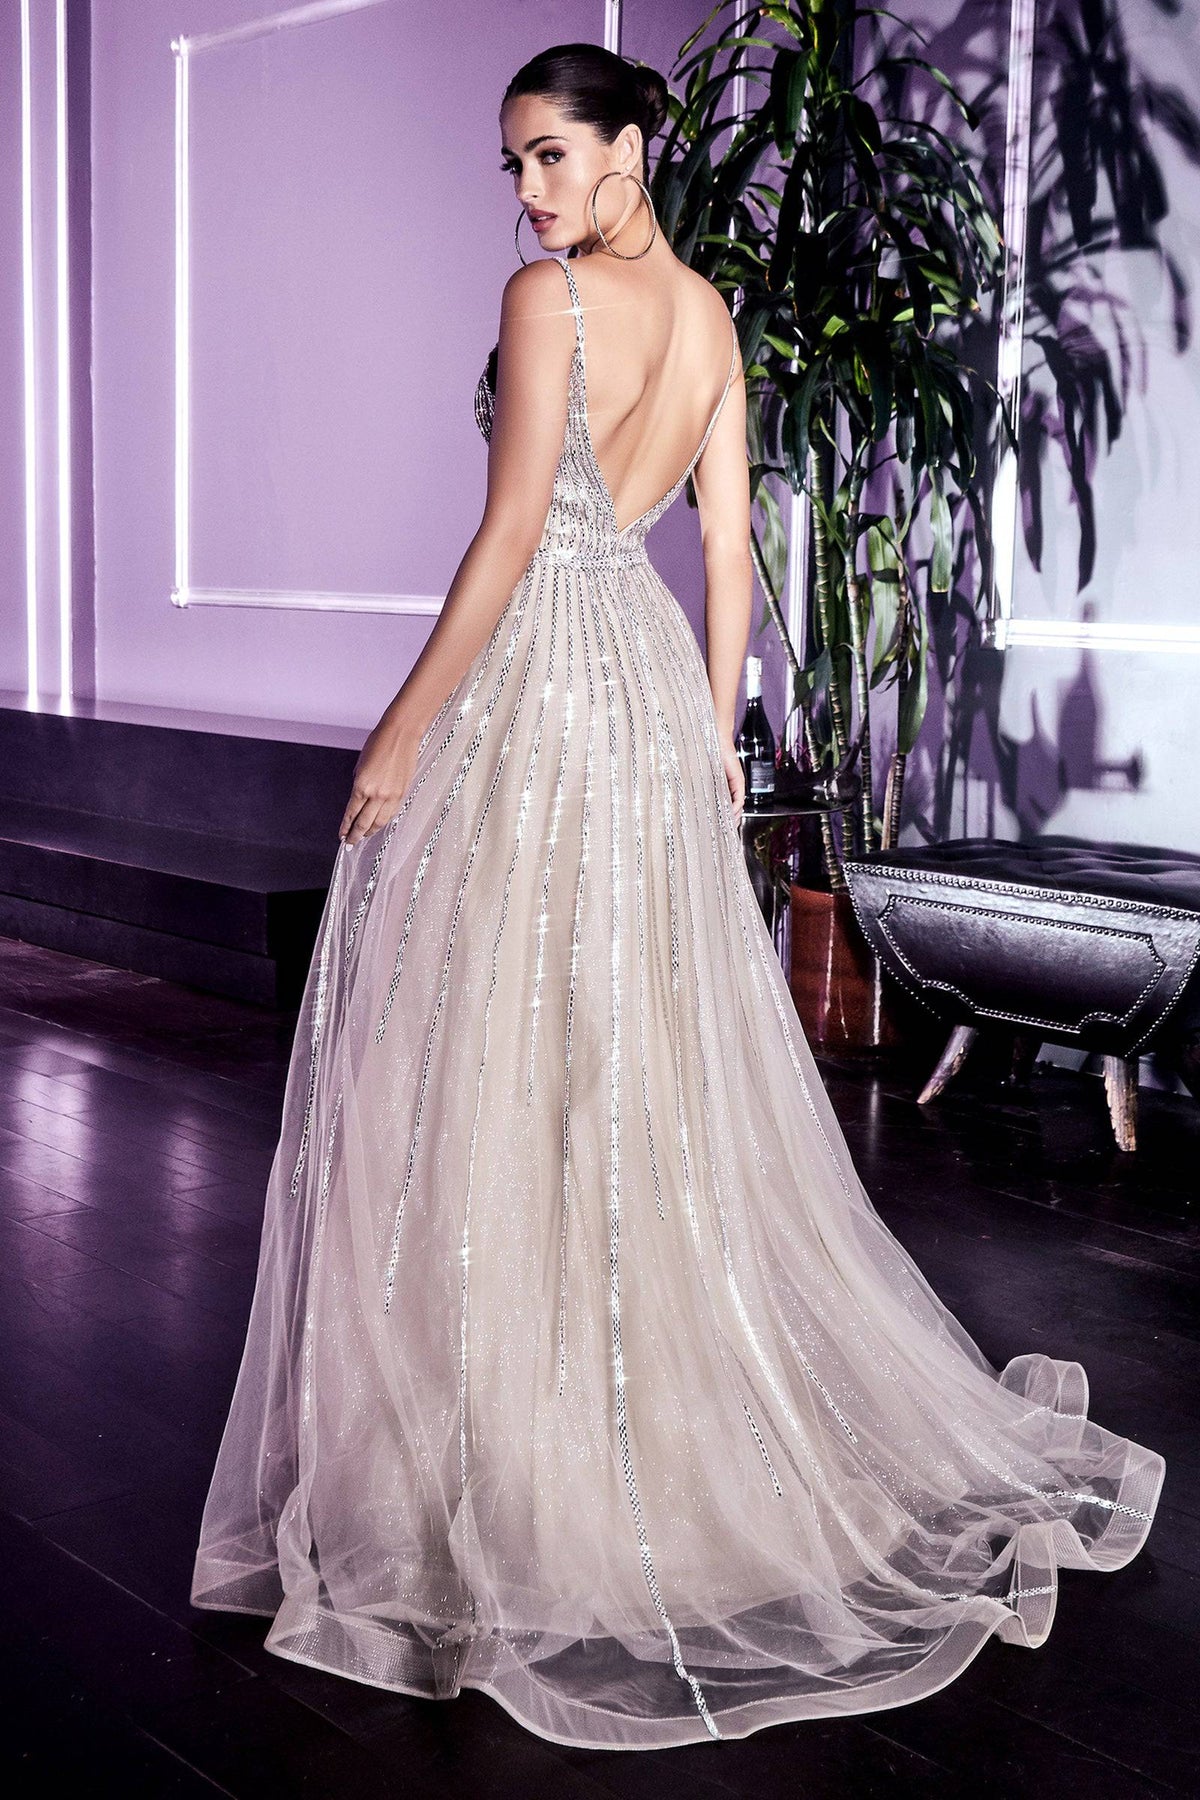 Elegant Long Gown with Deep Neckline and Shimmery Skirt Overlay #CDCD940 - NORMA REED